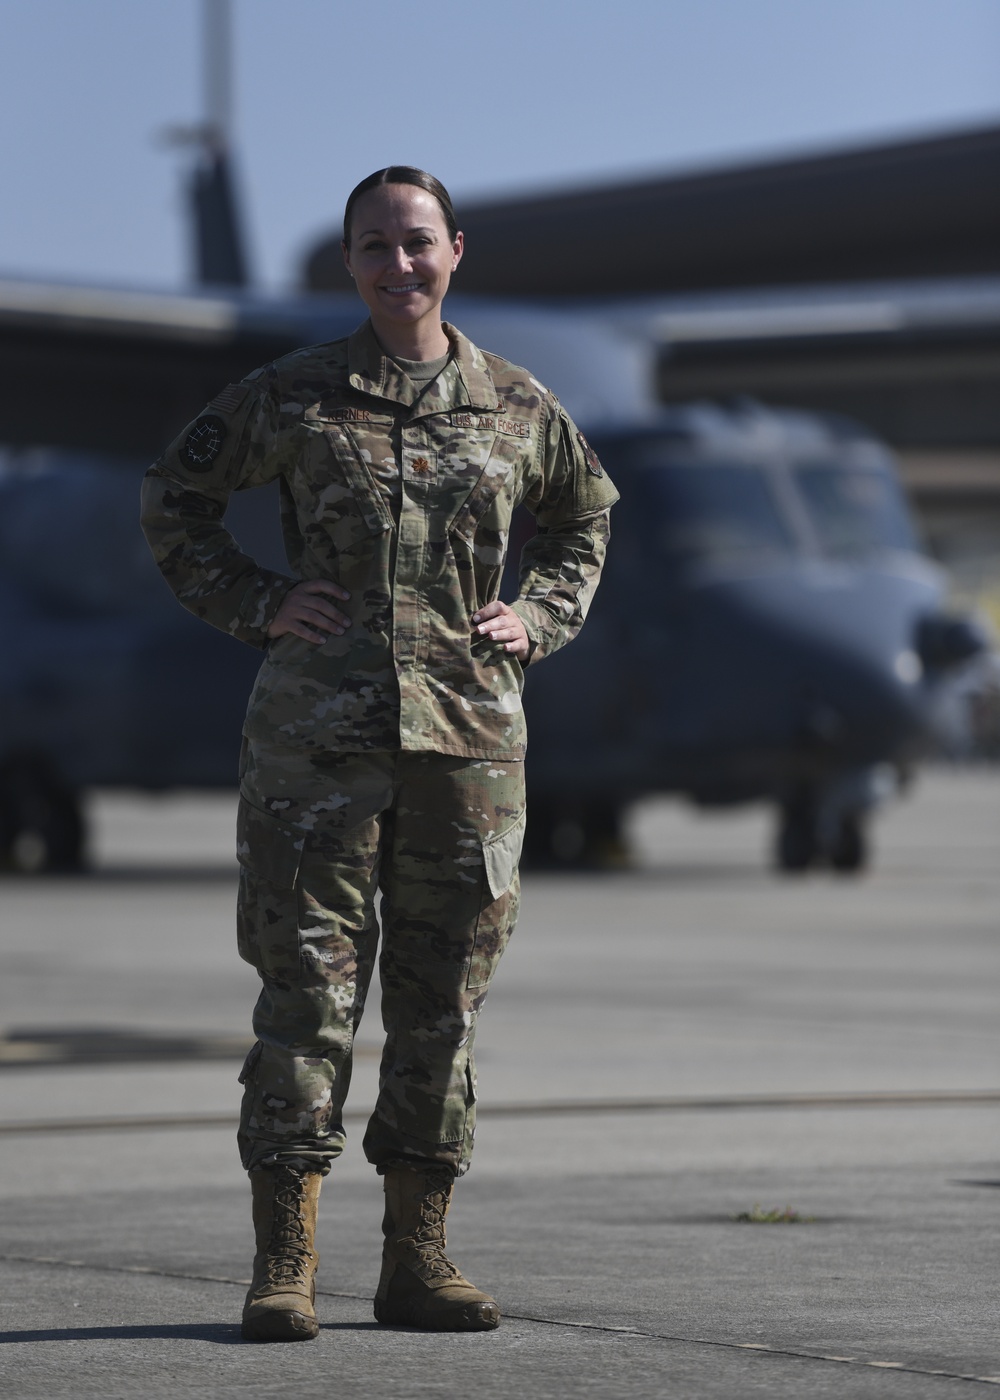 Maj. Carrie Kerner takes command of 801st SOAMXS